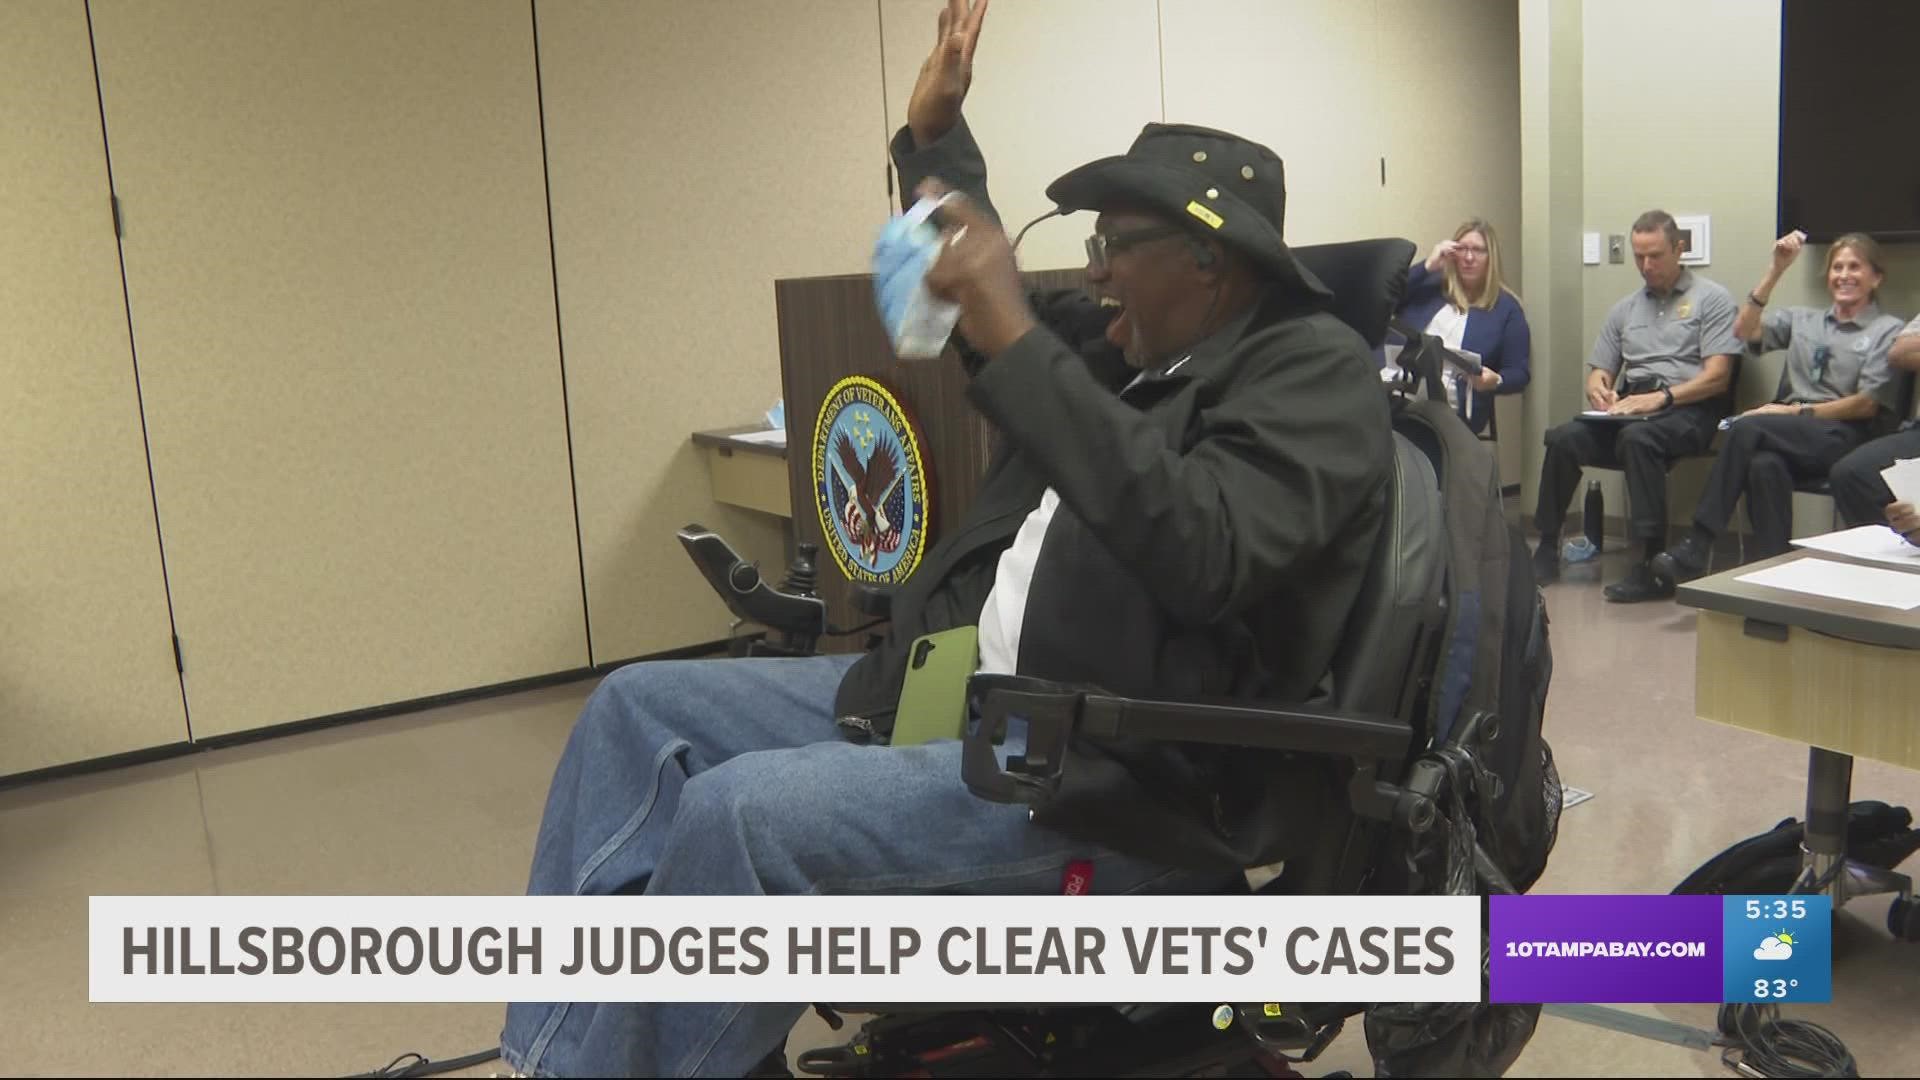 “It’s a massive deal for me. Especially today,” said a veteran, who had a $350 fine cleared.